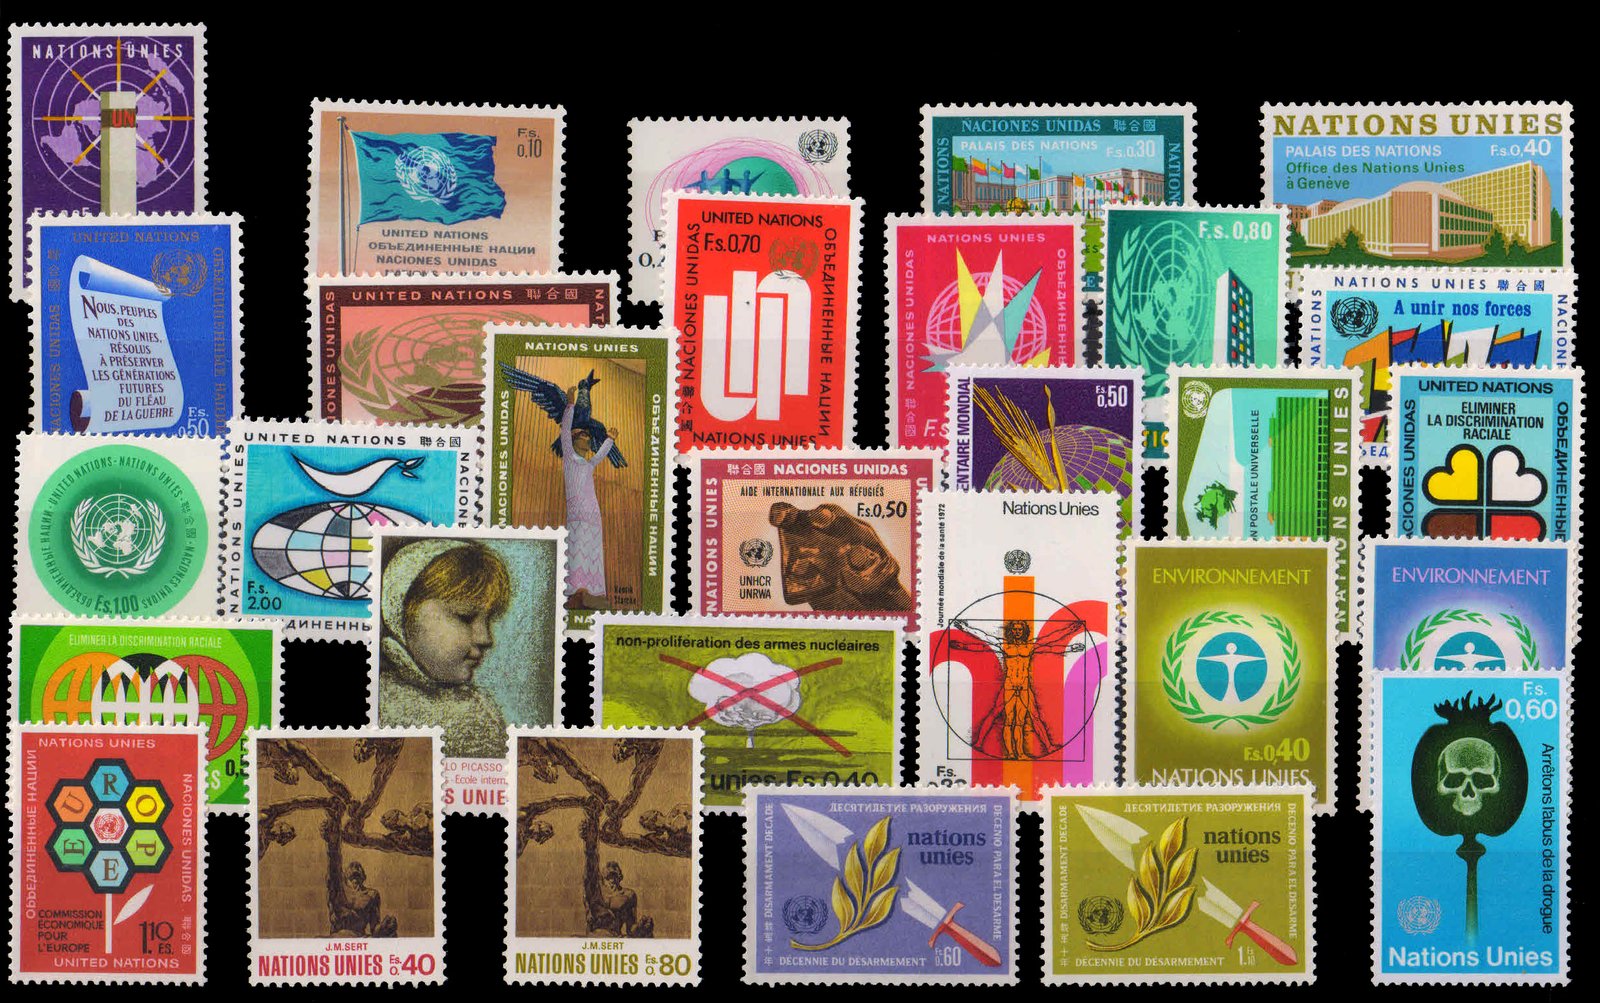 UNITED NATIONS-Geneva Office-58 All Different Stamps-MNH-Mostly Complete Sets-1969 to 1976 Period-Total 63 Stamps Issued-Catalog Value � 60-